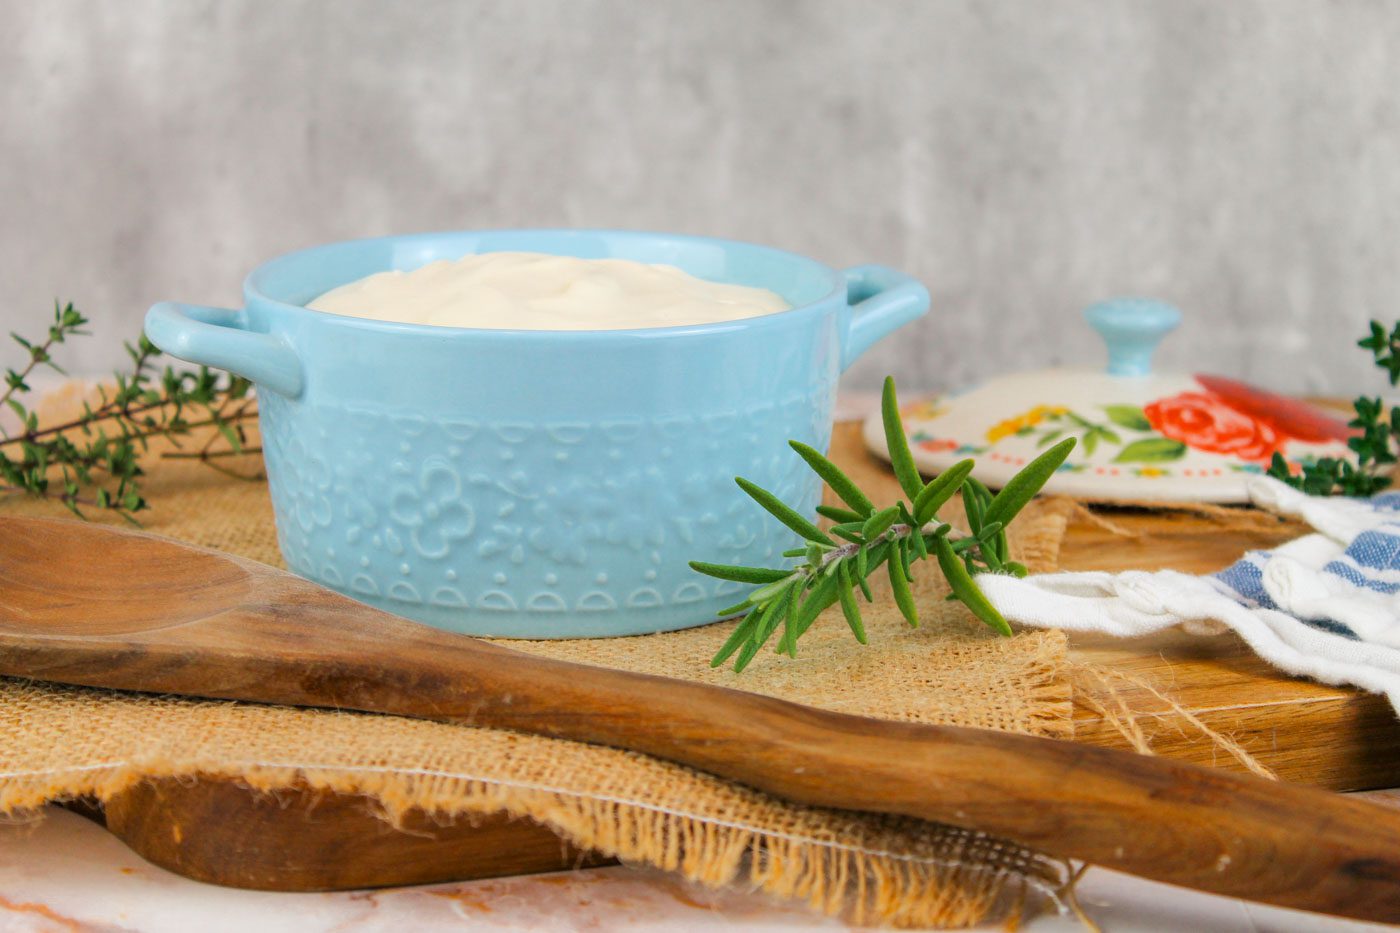 blue container full of sour cream sits on a wooden cutting board that has herbs and a towel and a wooden spoon